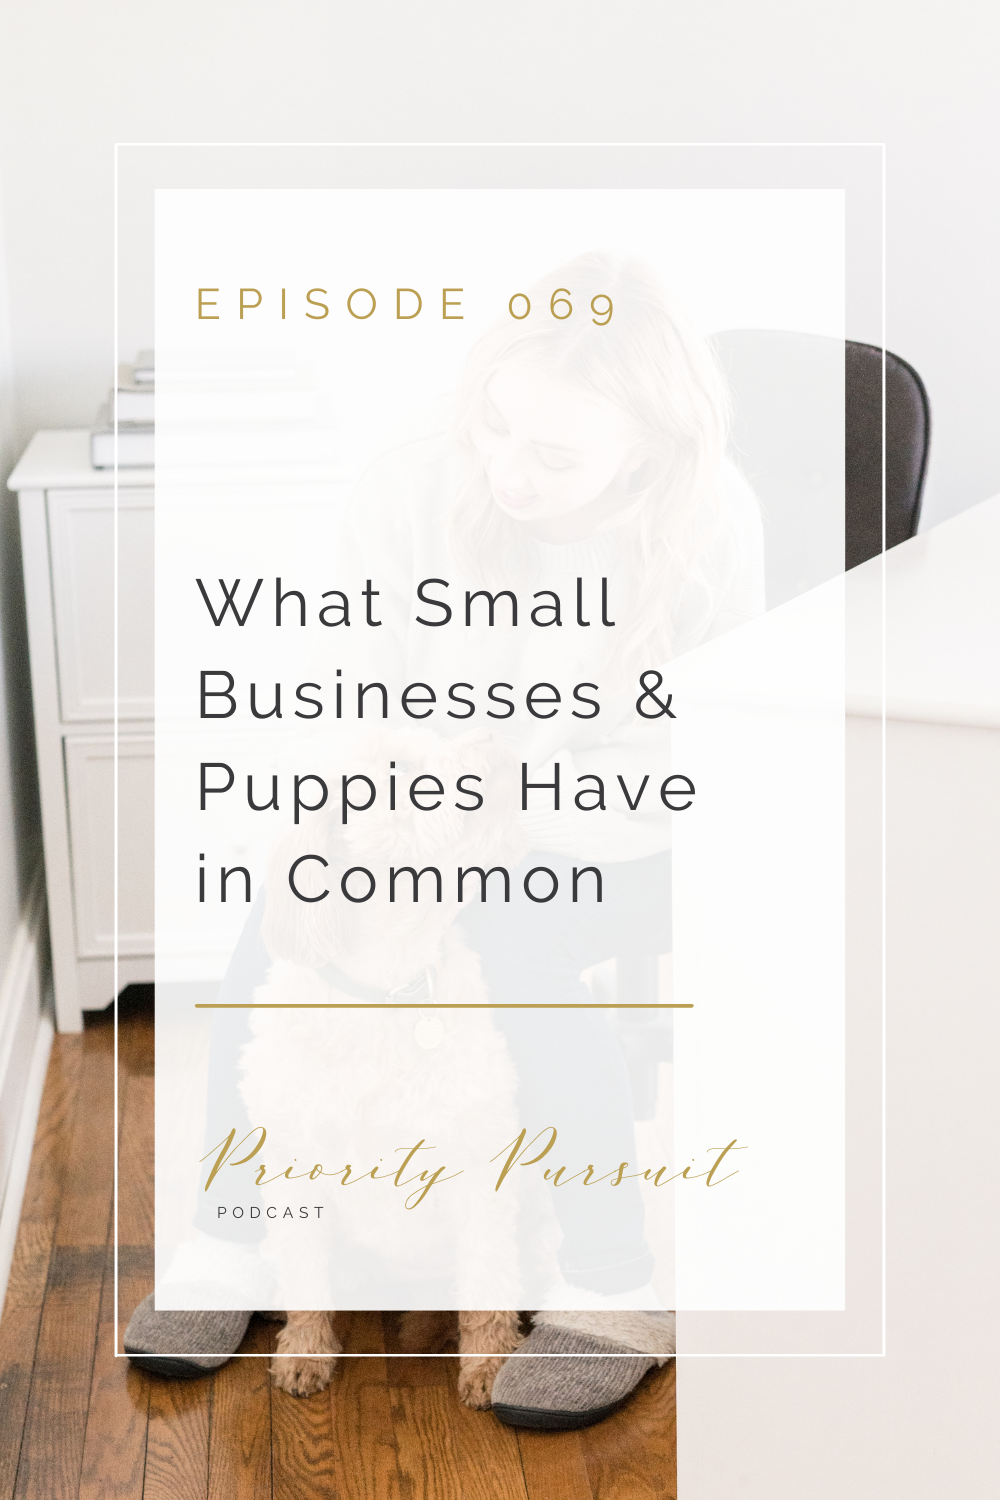 Victoria Rayburn explains what puppies and small businesses have in common in this episode of “Priority Pursuit.” 